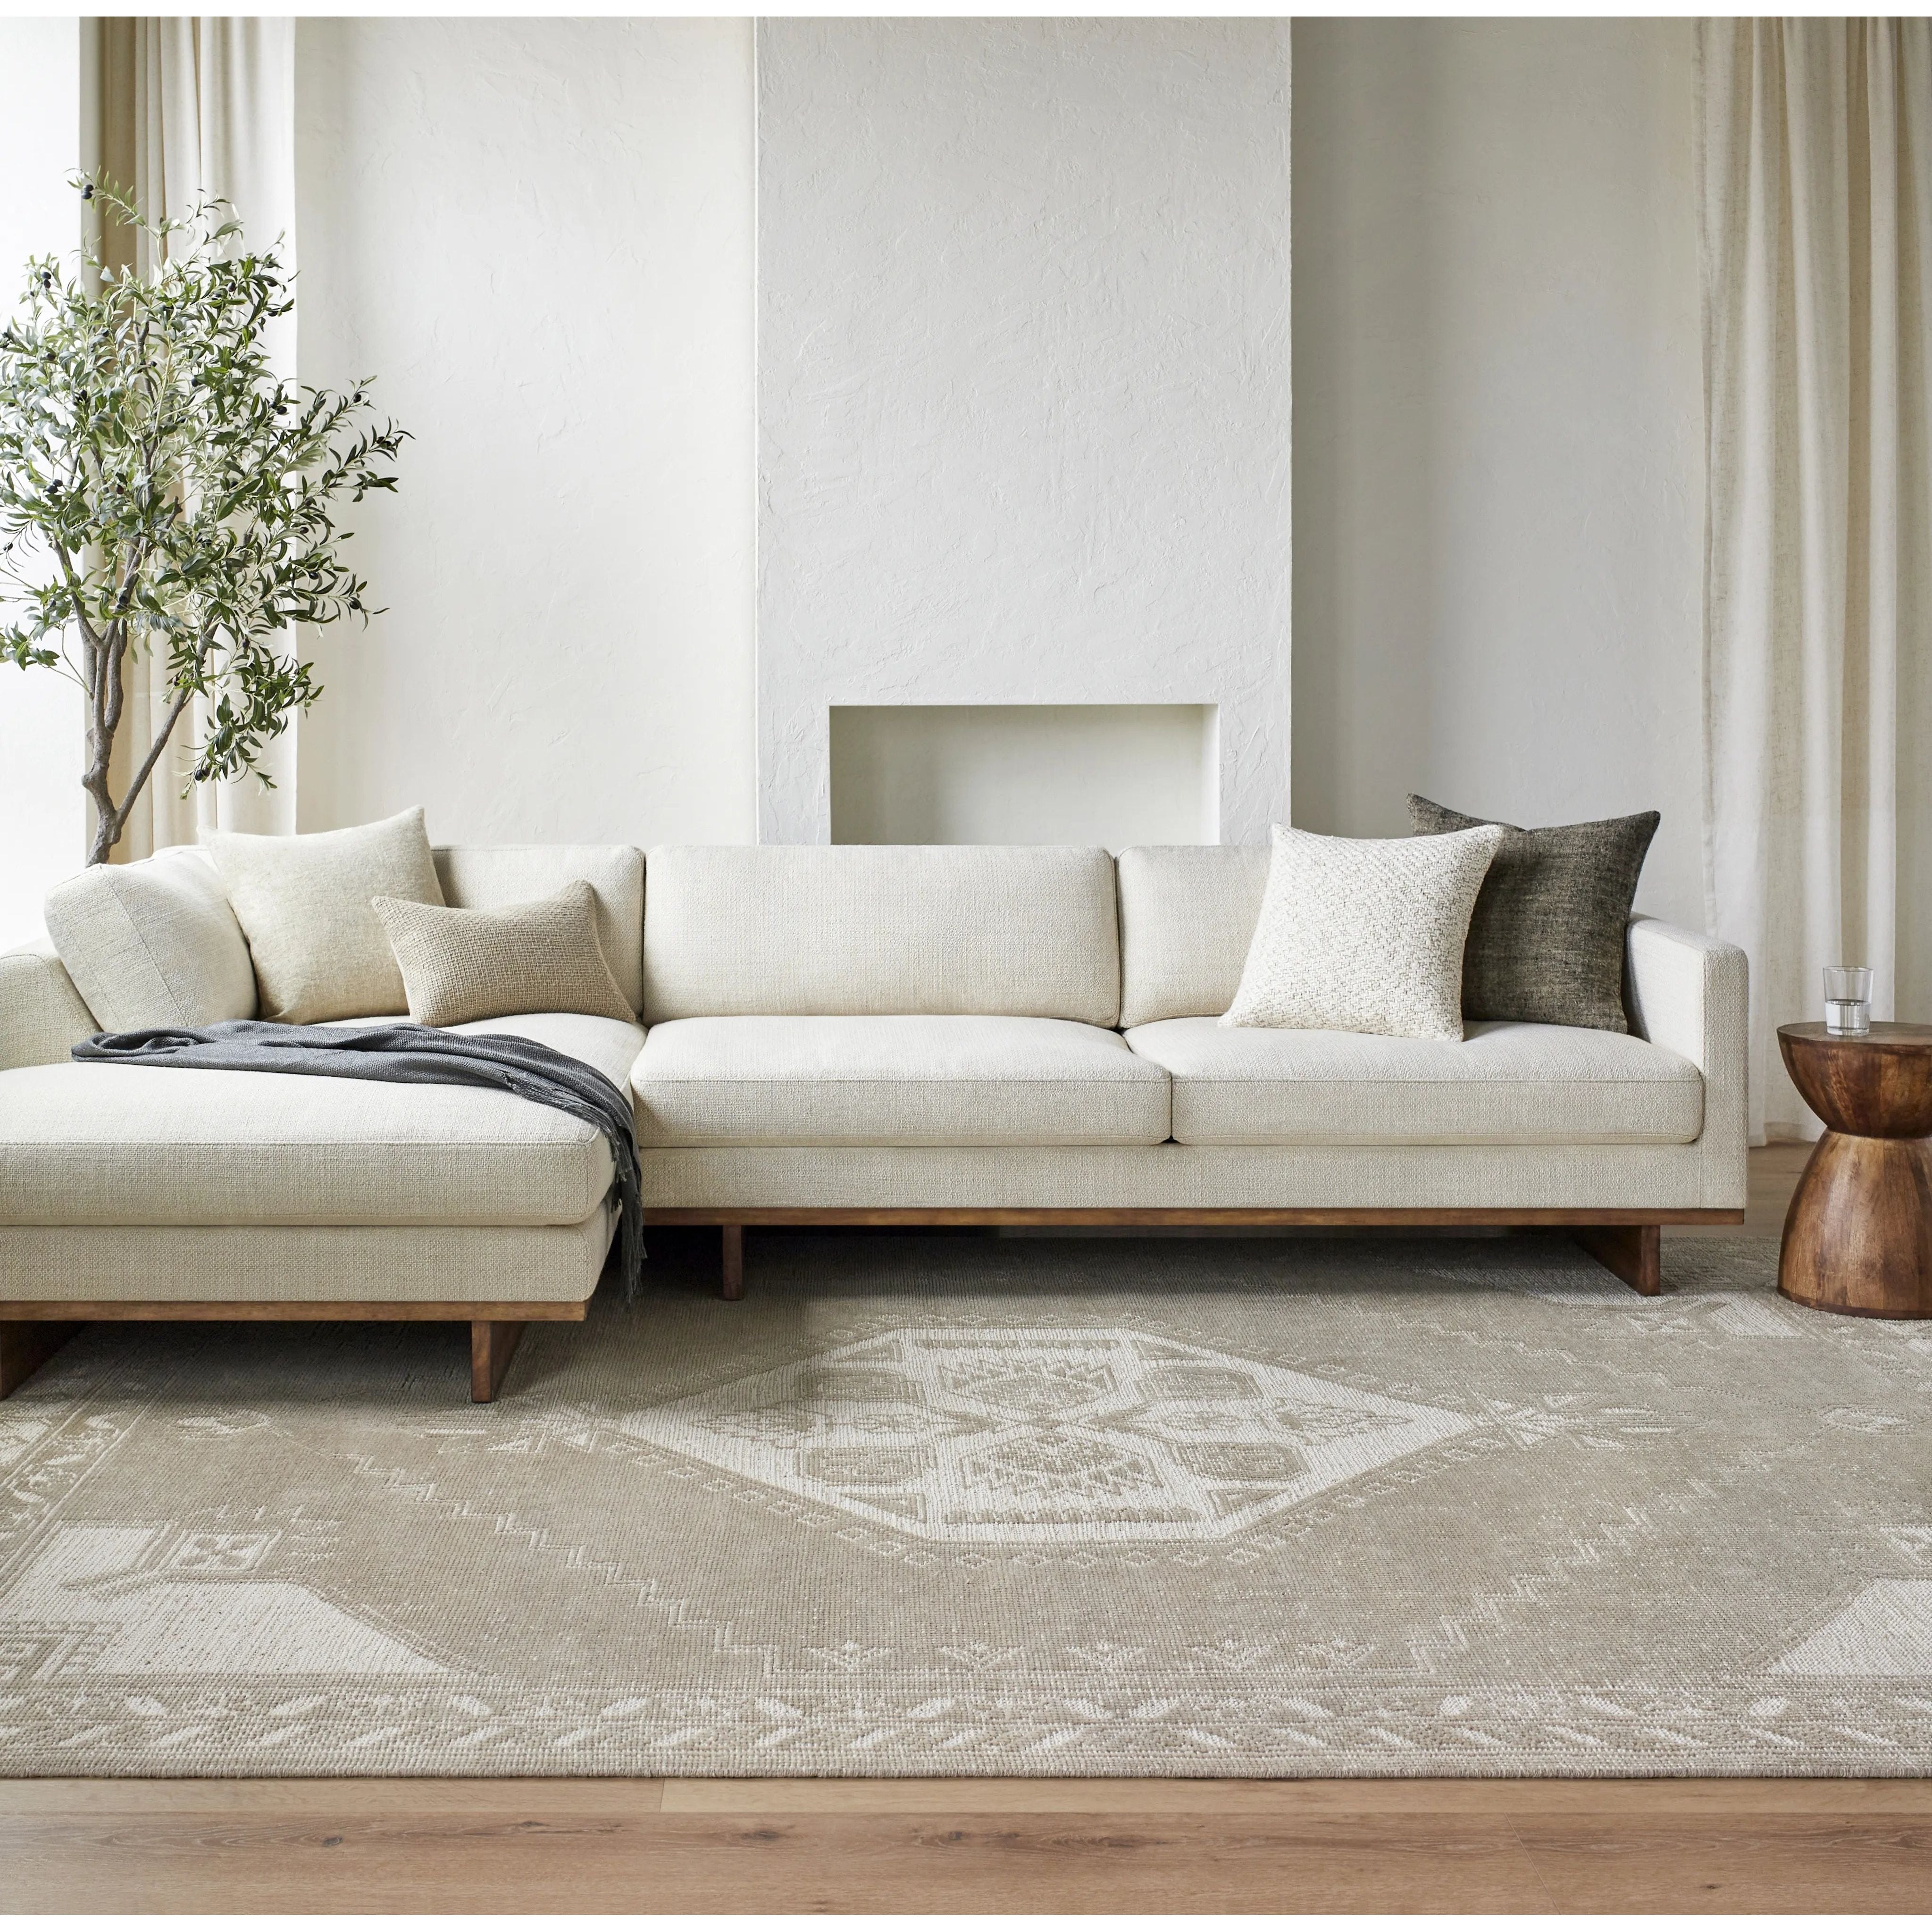 The Zahra Collection showcases traditional inspired designs that exemplify timeless styles of elegance, comfort, and sophistication. Amethyst Home provides interior design, new home construction design consulting, vintage area rugs, and lighting in the Tampa metro area.